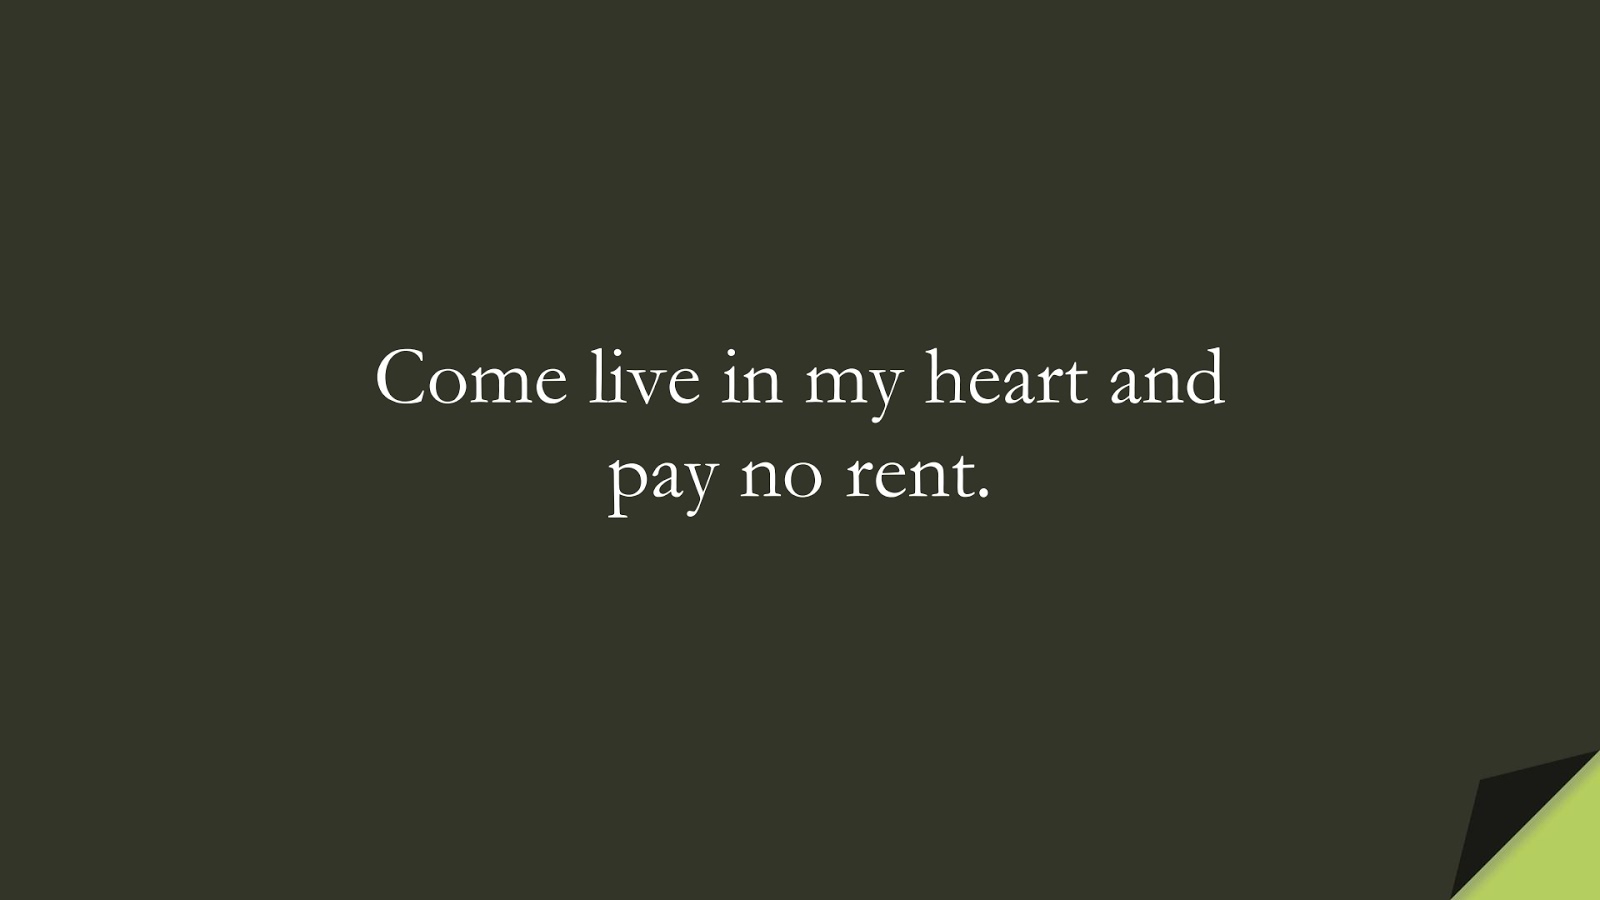 Come live in my heart and pay no rent.FALSE